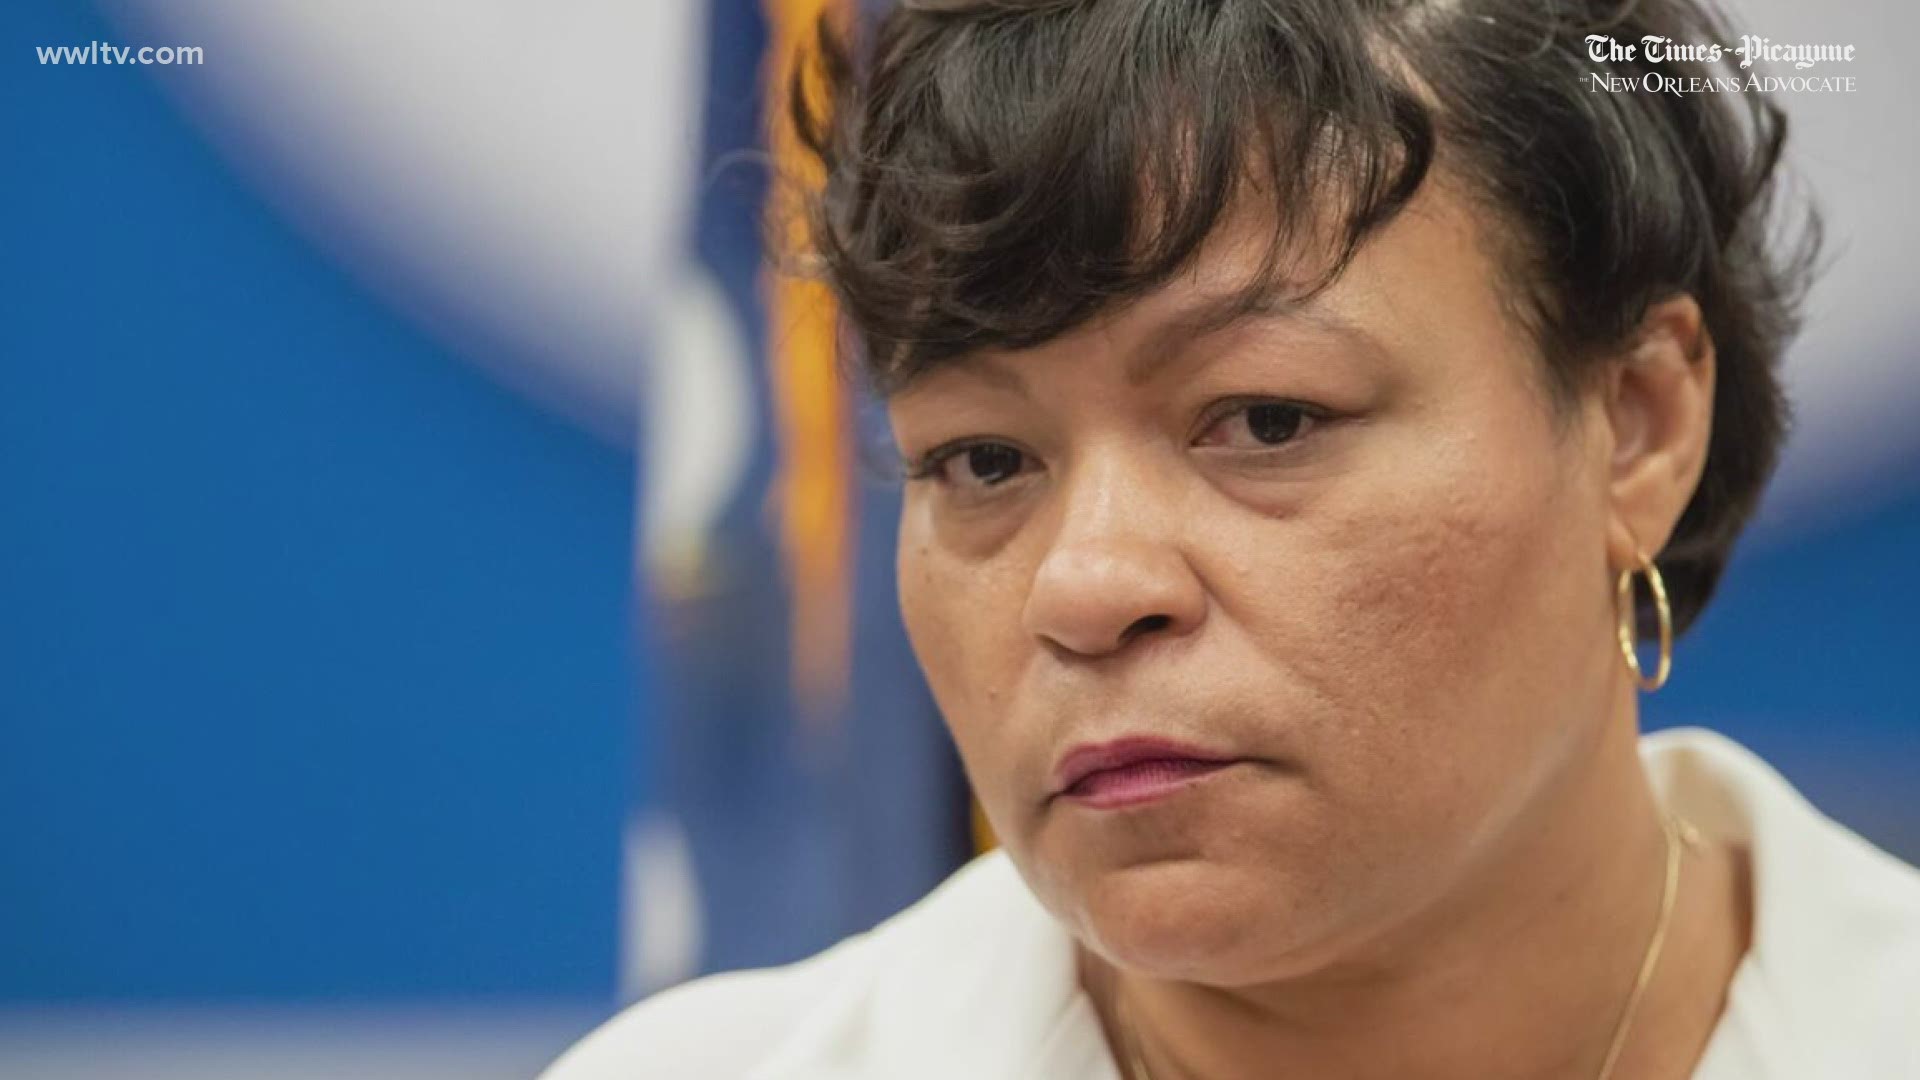 It was another major political blow for New Orleans Mayor Latoya Cantrell.